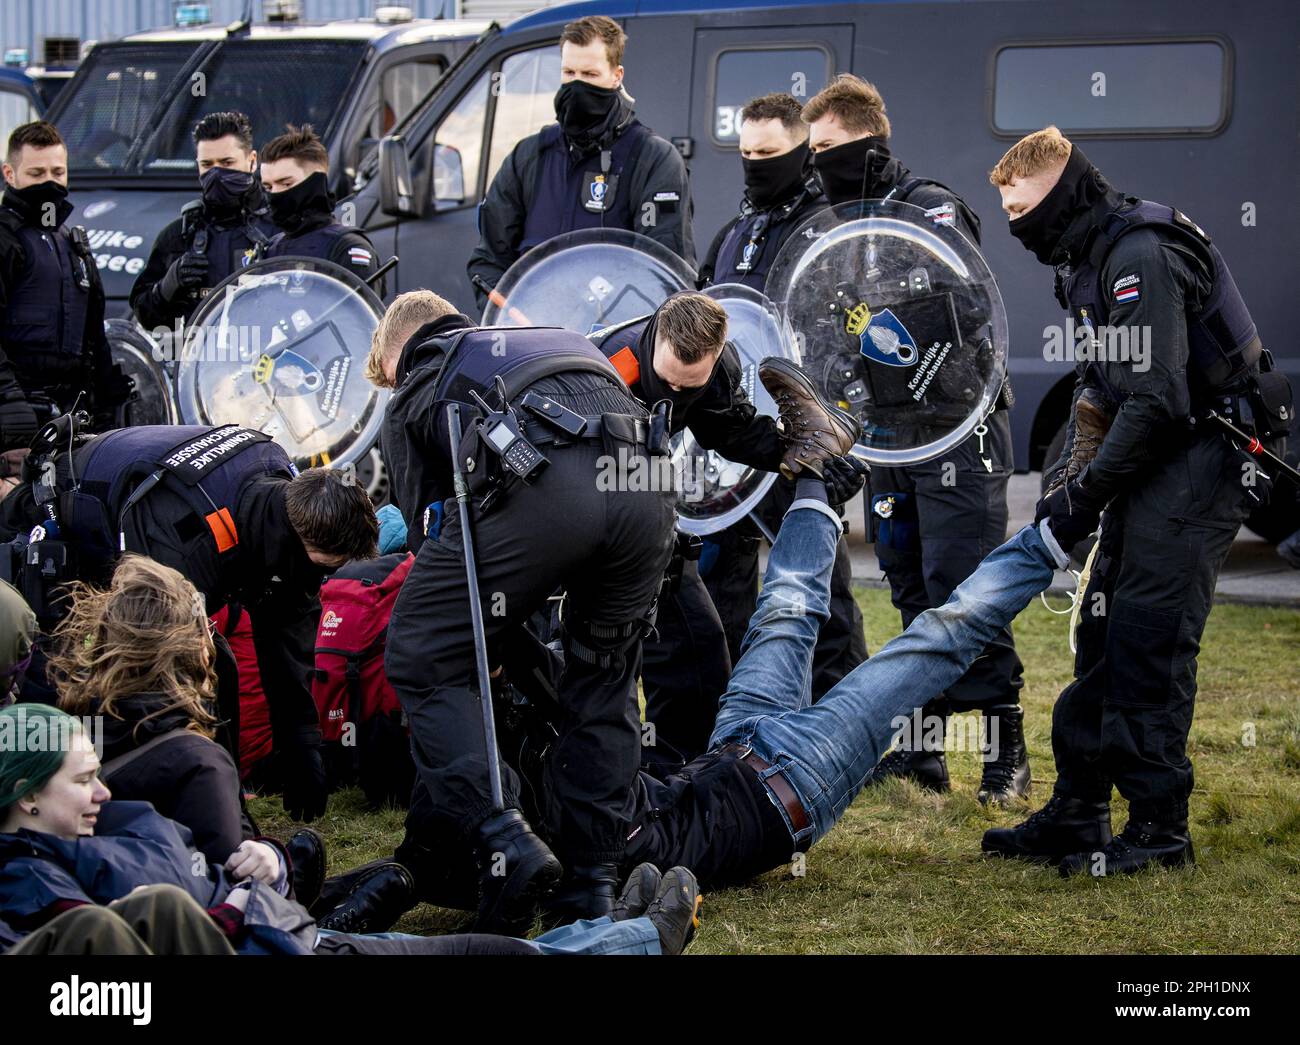 EINDHOVEN - A climate activist from Extinction Rebellion is arrested during an action at Eindhoven Airport. The activists are very concerned about the damage that air traffic causes to the climate. ANP SEM VAN DER WAL netherlands out - belgium out Stock Photo